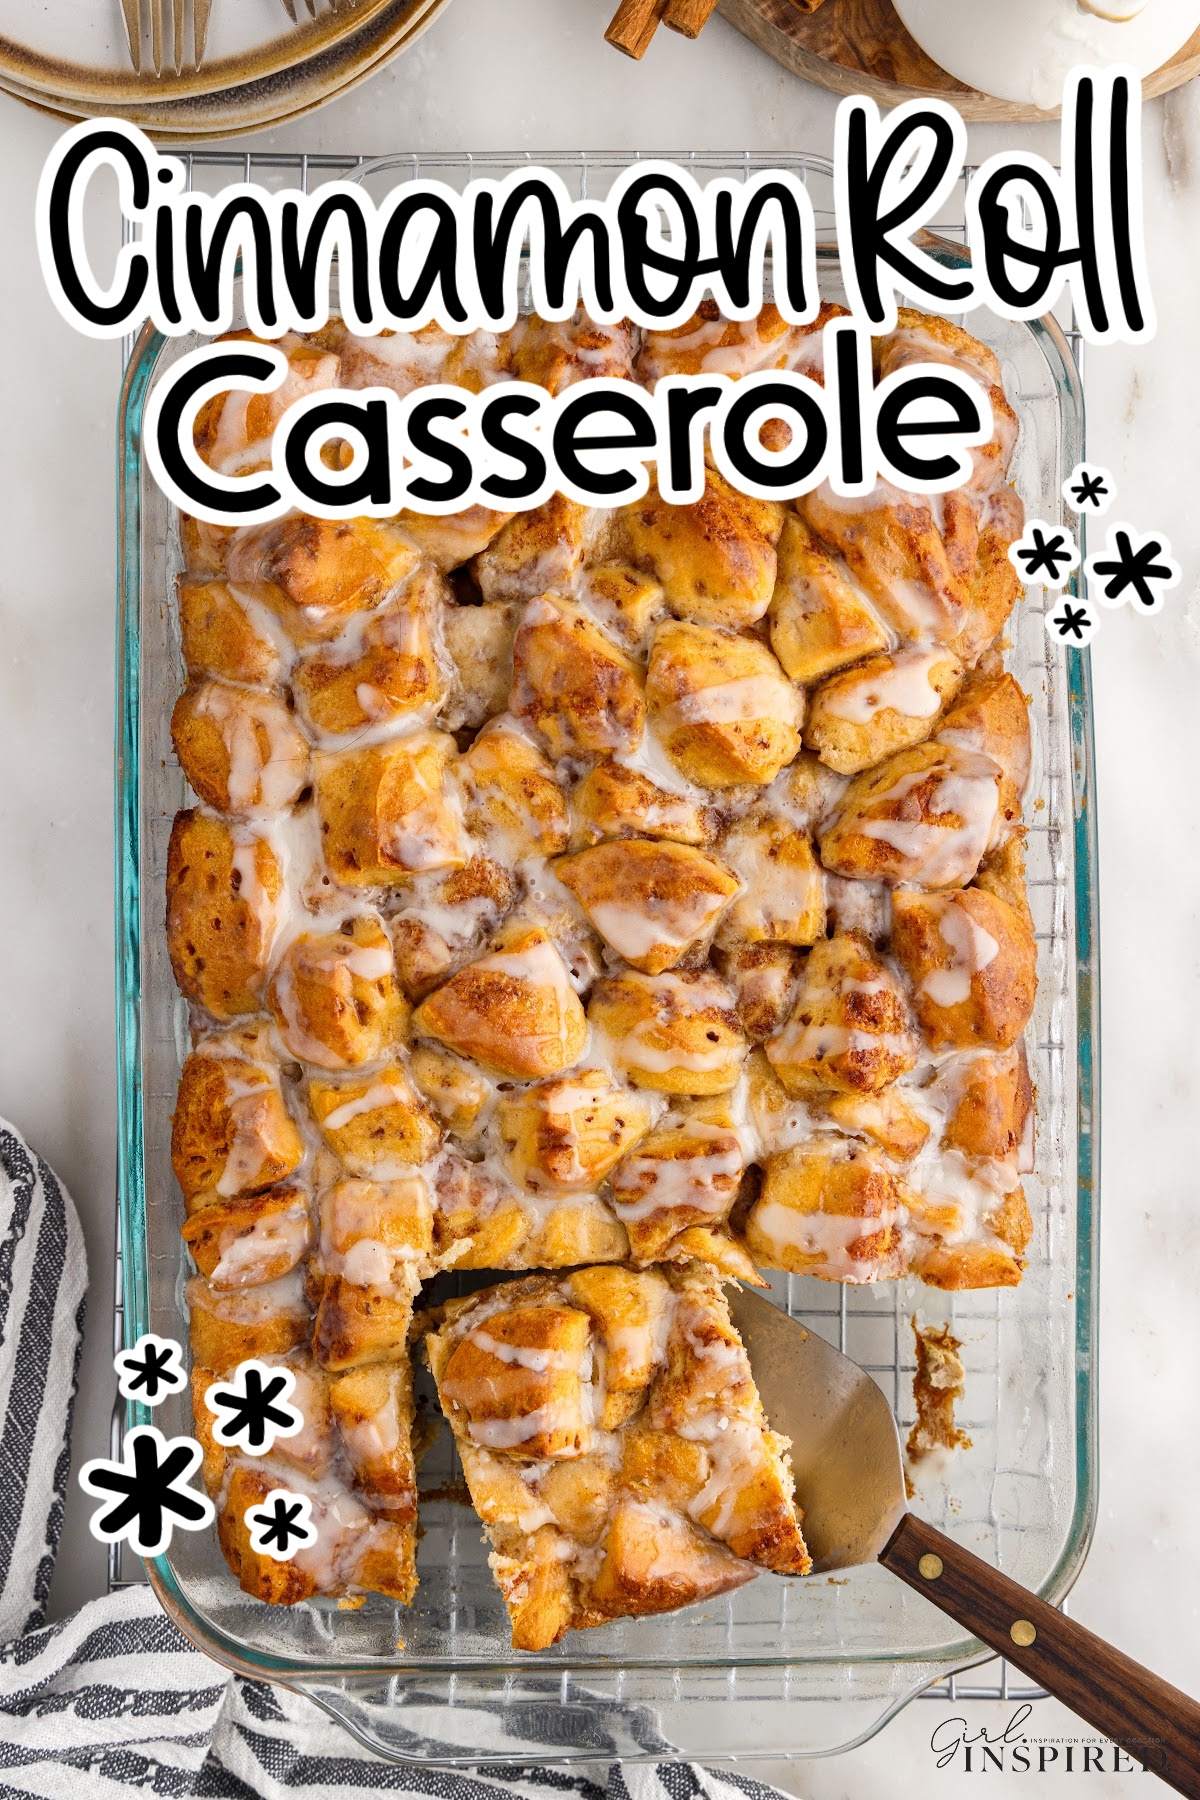 Overhead view of Breakfast Cinnamon Roll Casserole with text overlay.